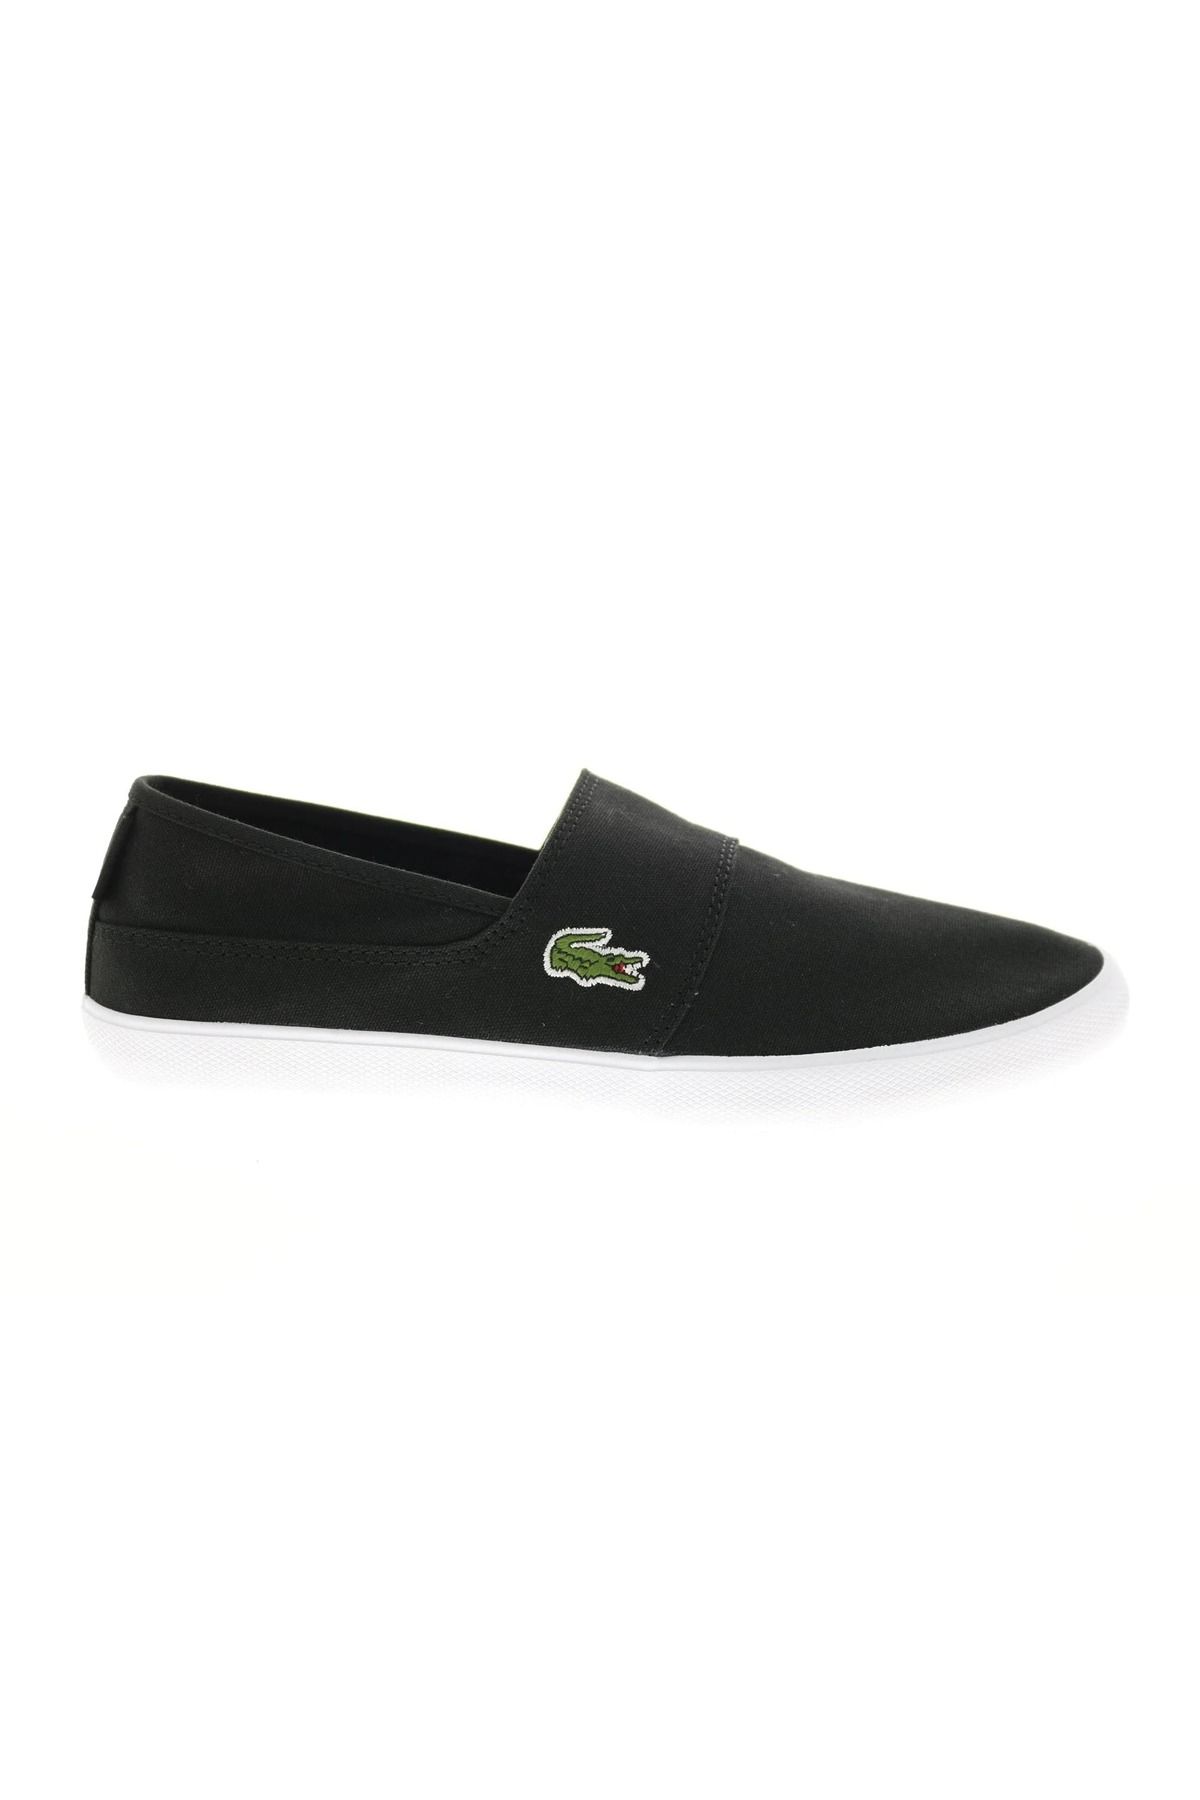 Lacoste Marice Bl 2 CAM Mens Black Canvas Slip On Lifestyle Sneakers Shoes